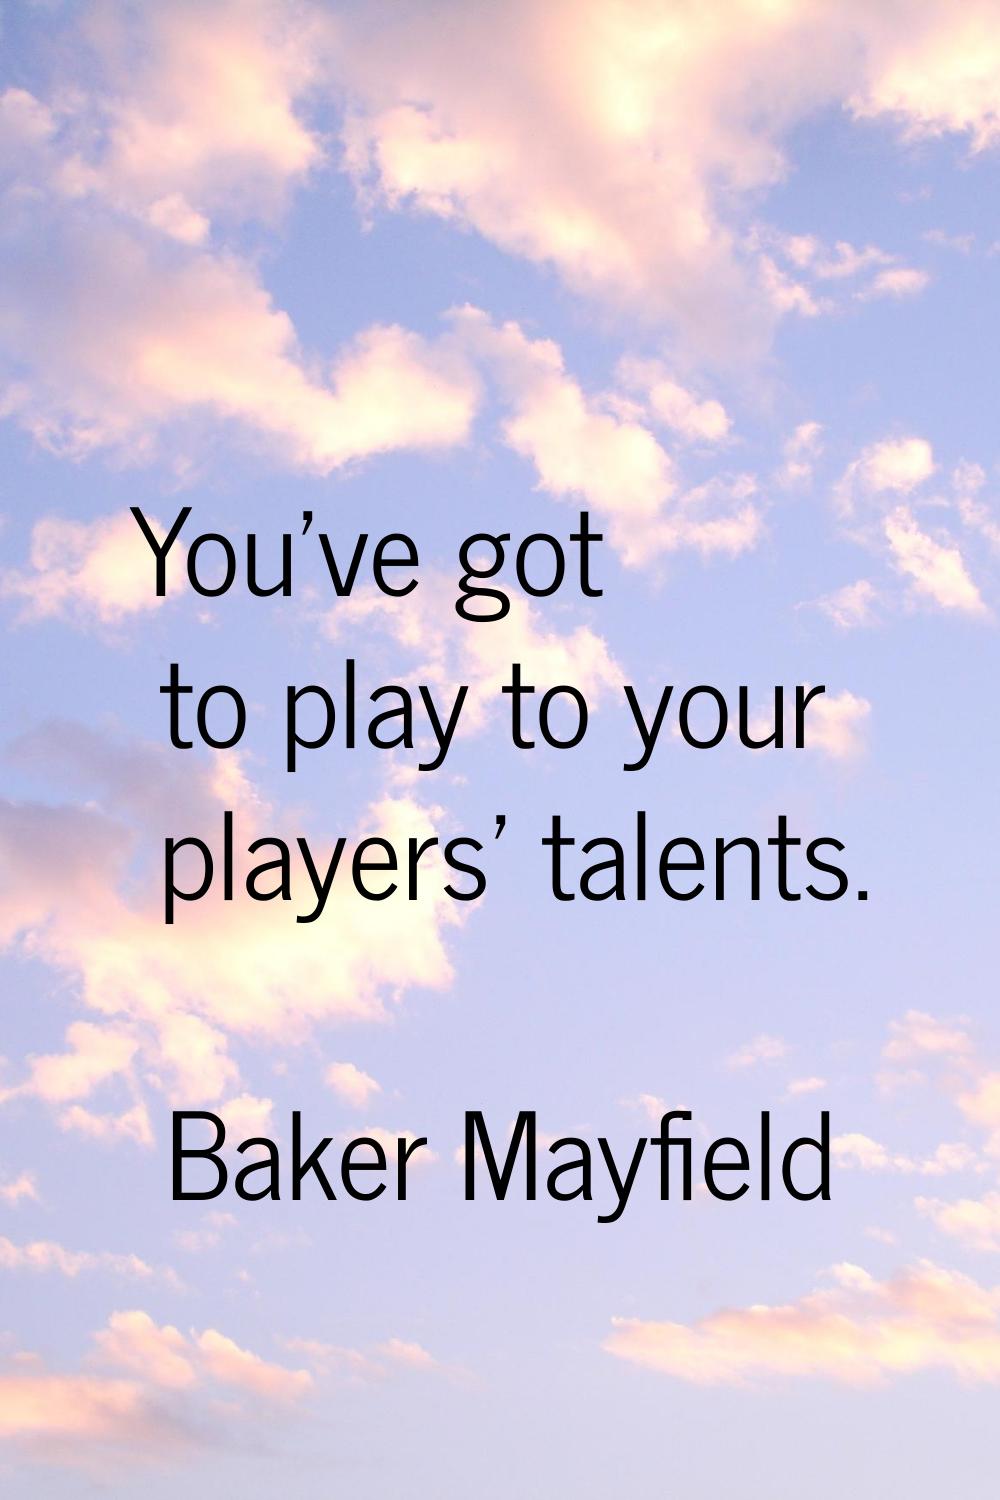 You've got to play to your players' talents.